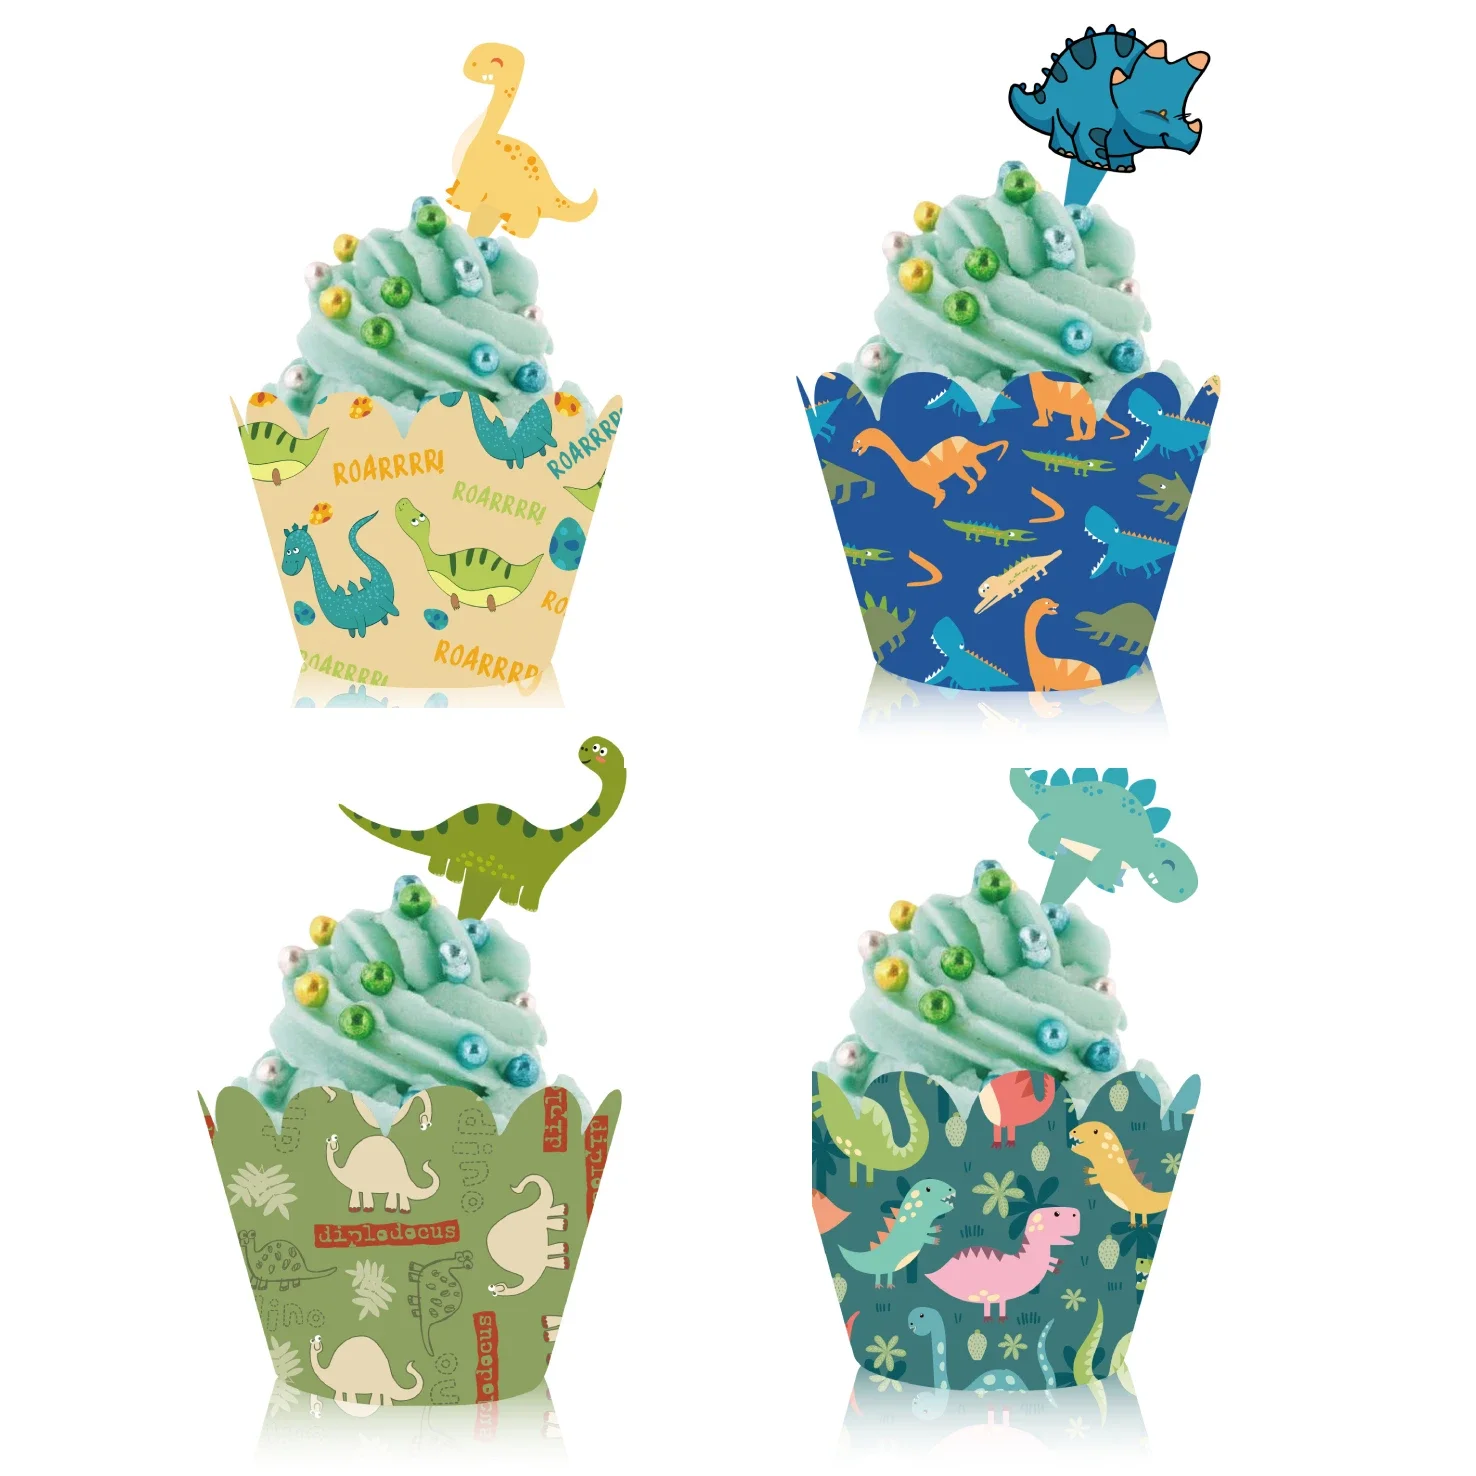 12/24pcs Dinosaur Cupcake Wrappers Cake Topper For Jurassic World Theme Kids Birthday Party Decoration Cake Decorating Supplies